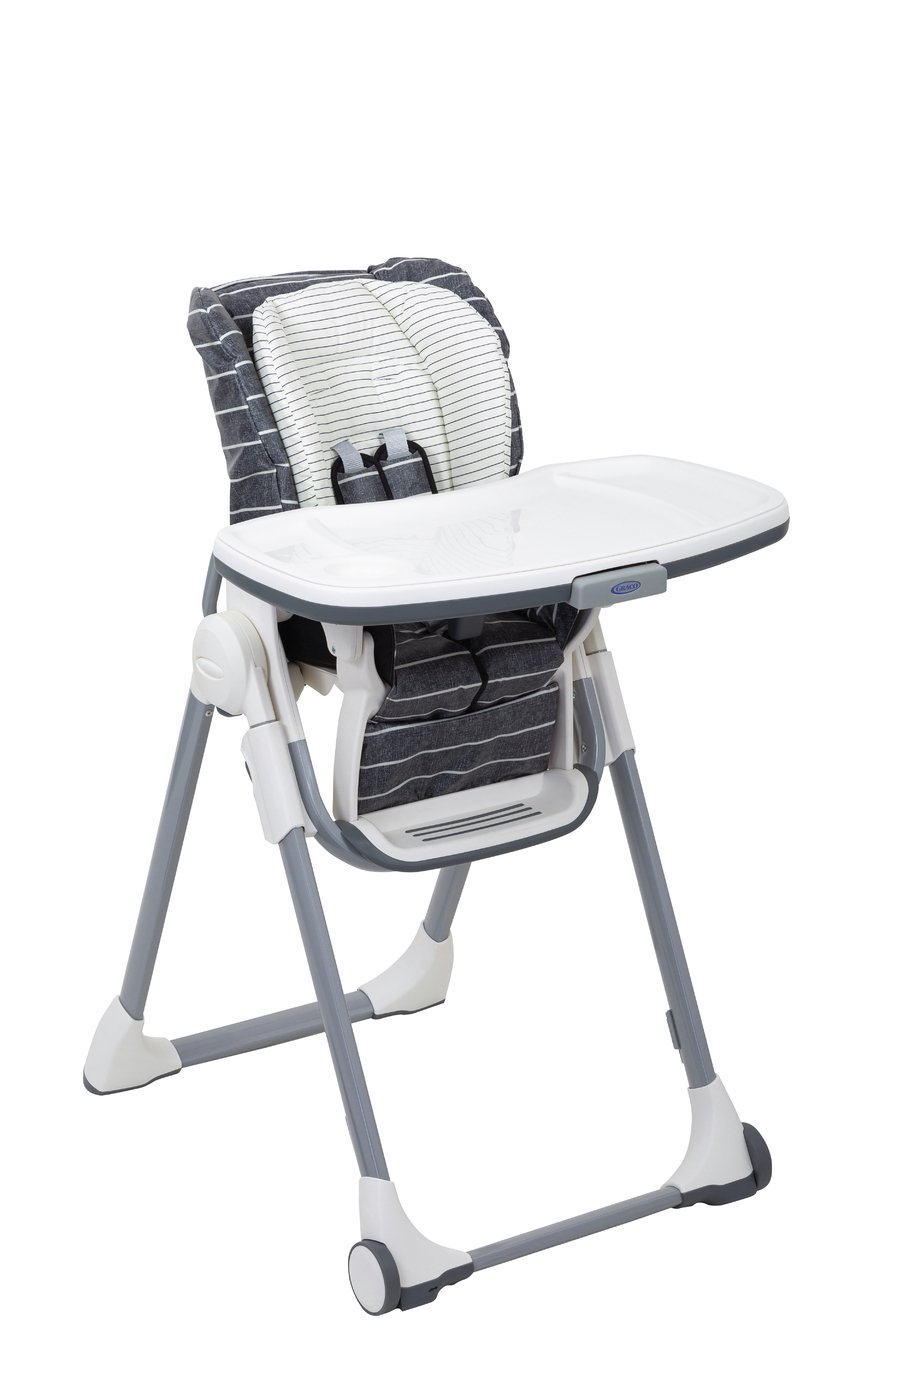 Graco Swiftfold Highchair Review